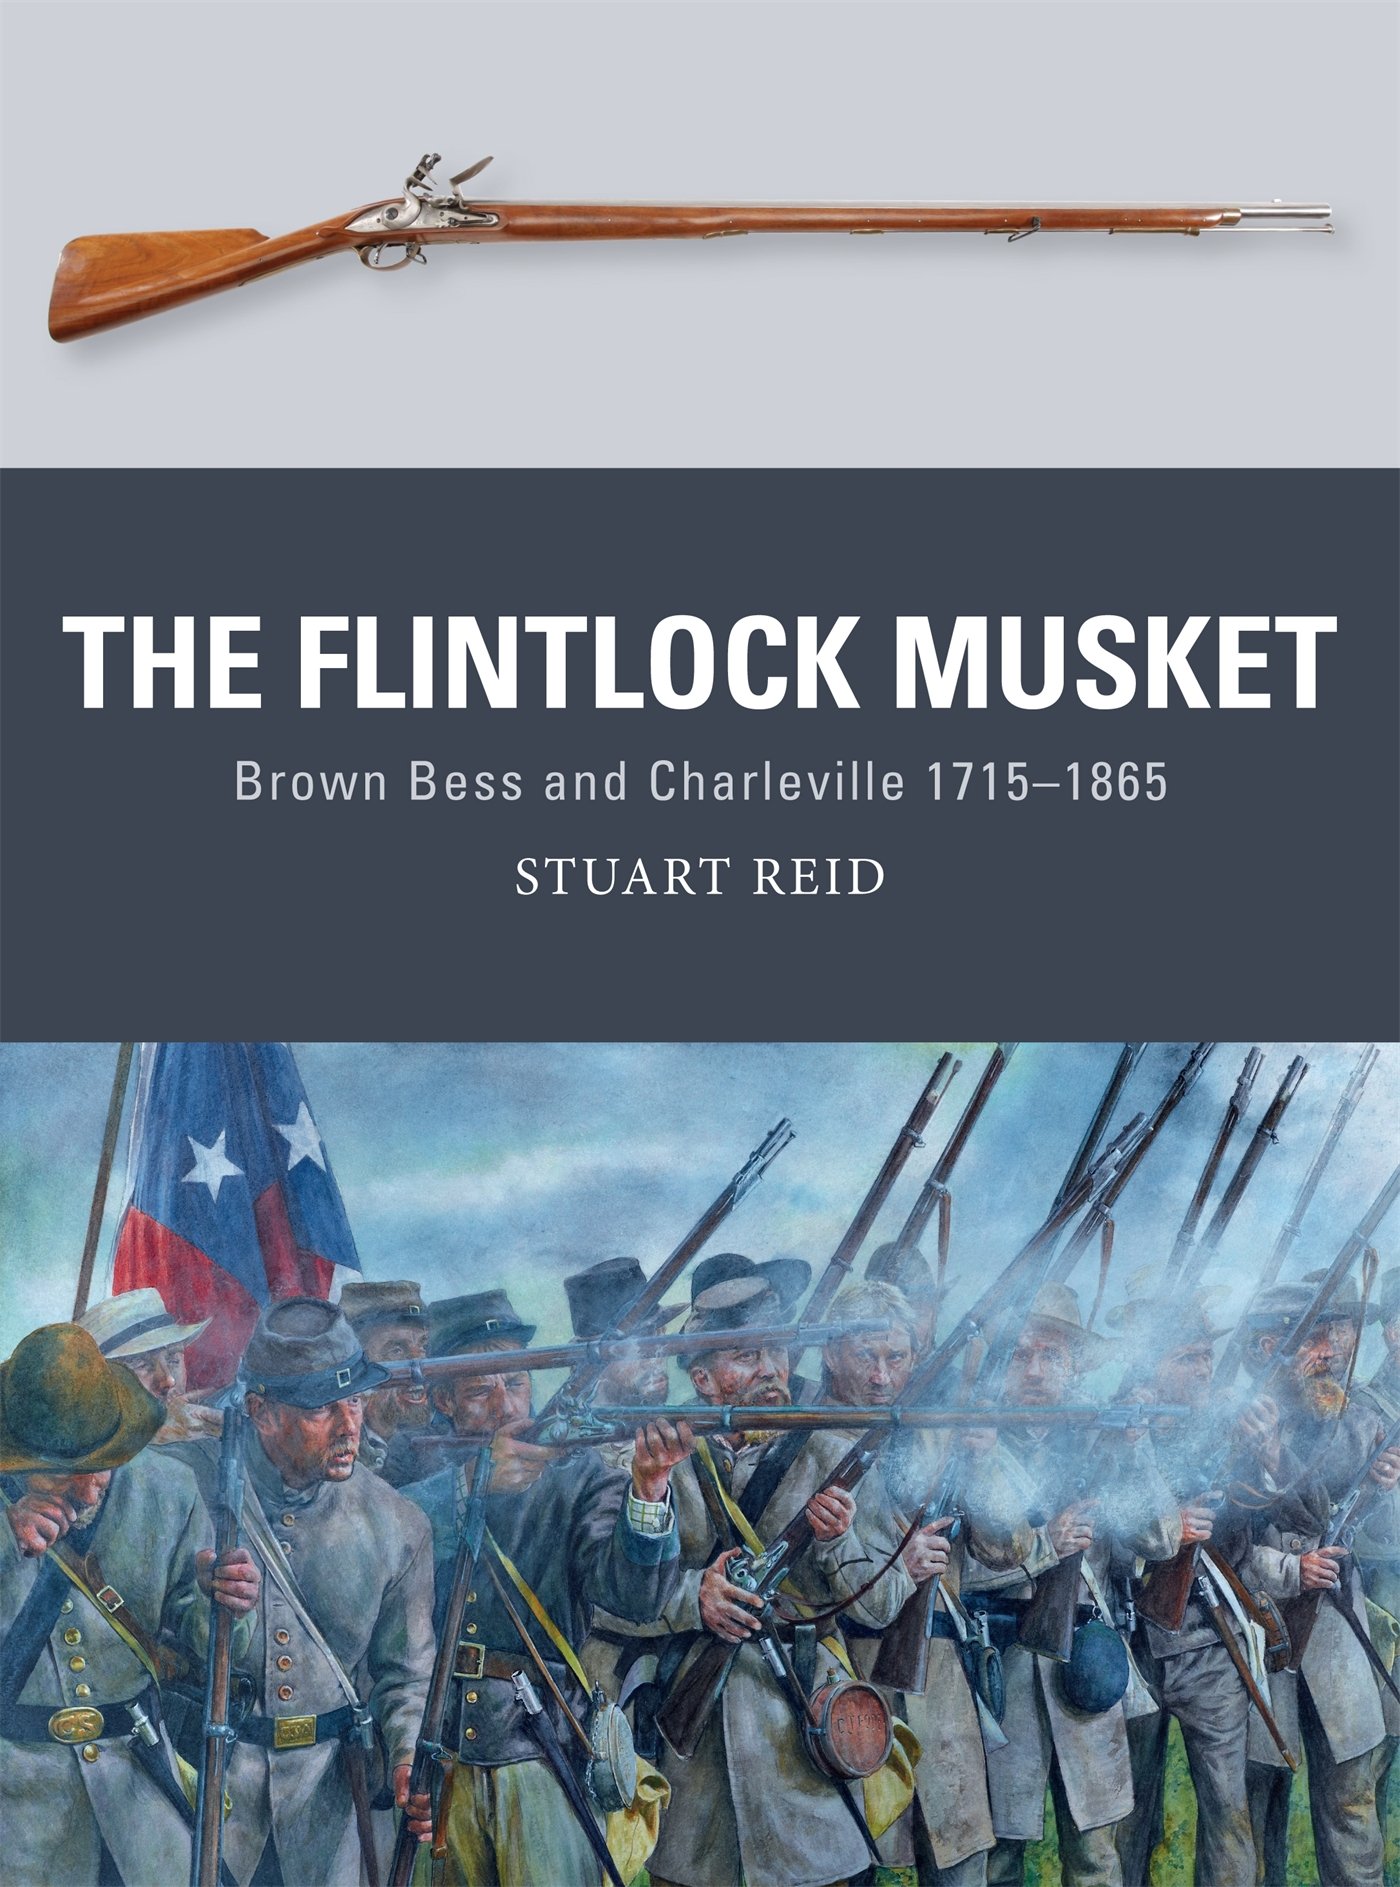 The Flintlock Musket. Brown Bess and Charleville 1715–1865, 2016, 80 p.